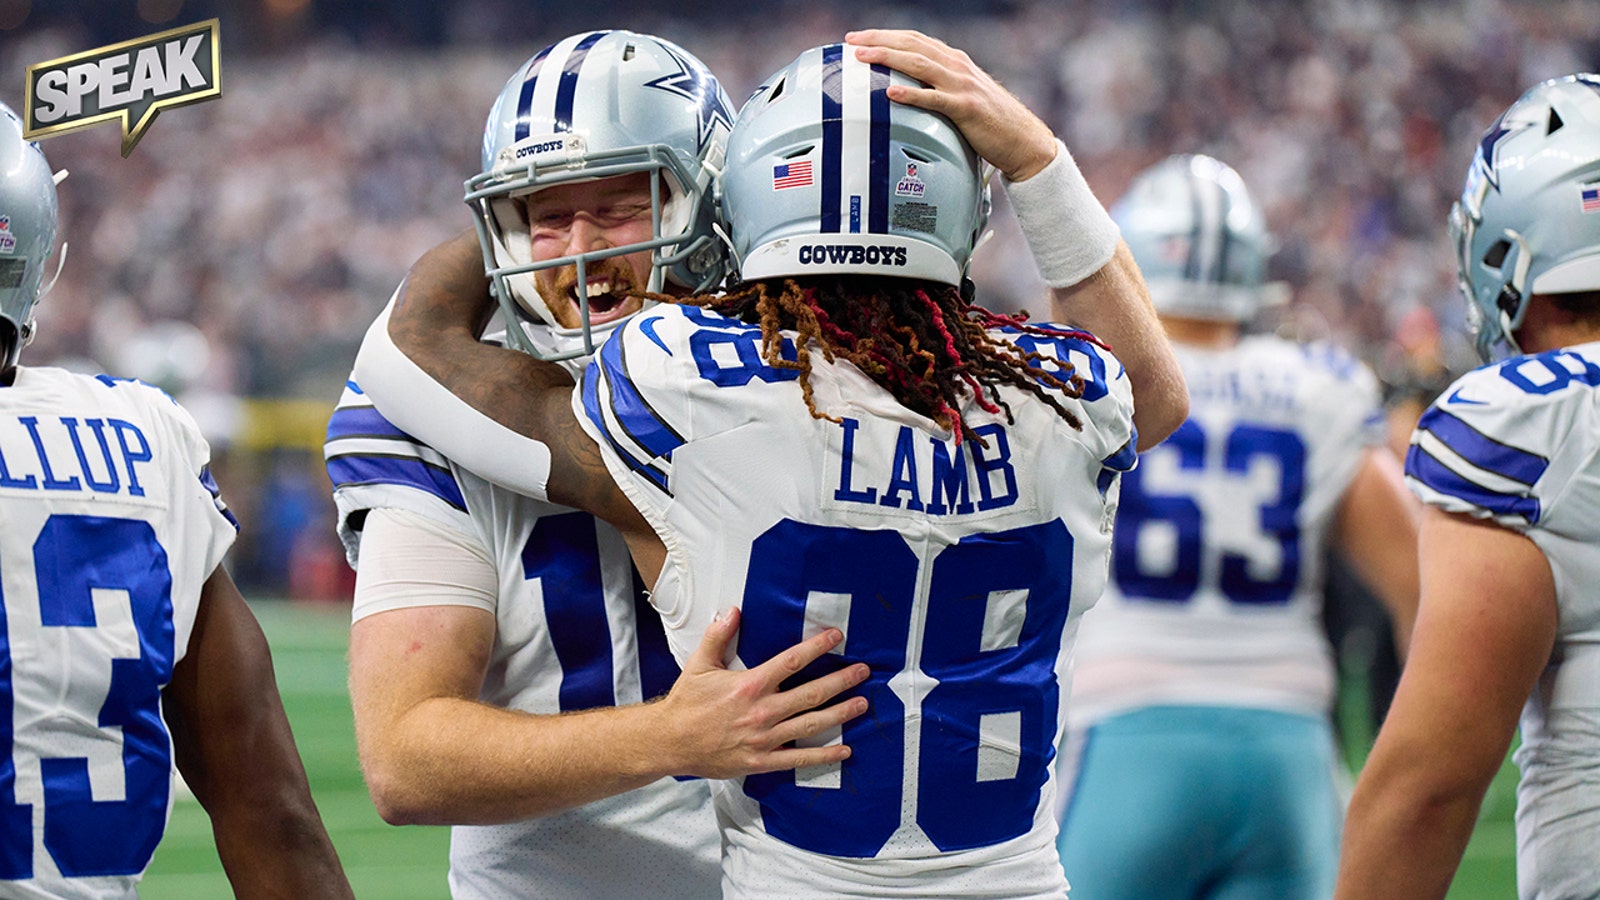 Cowboys defeat Commanders, move to 3-1 on the season